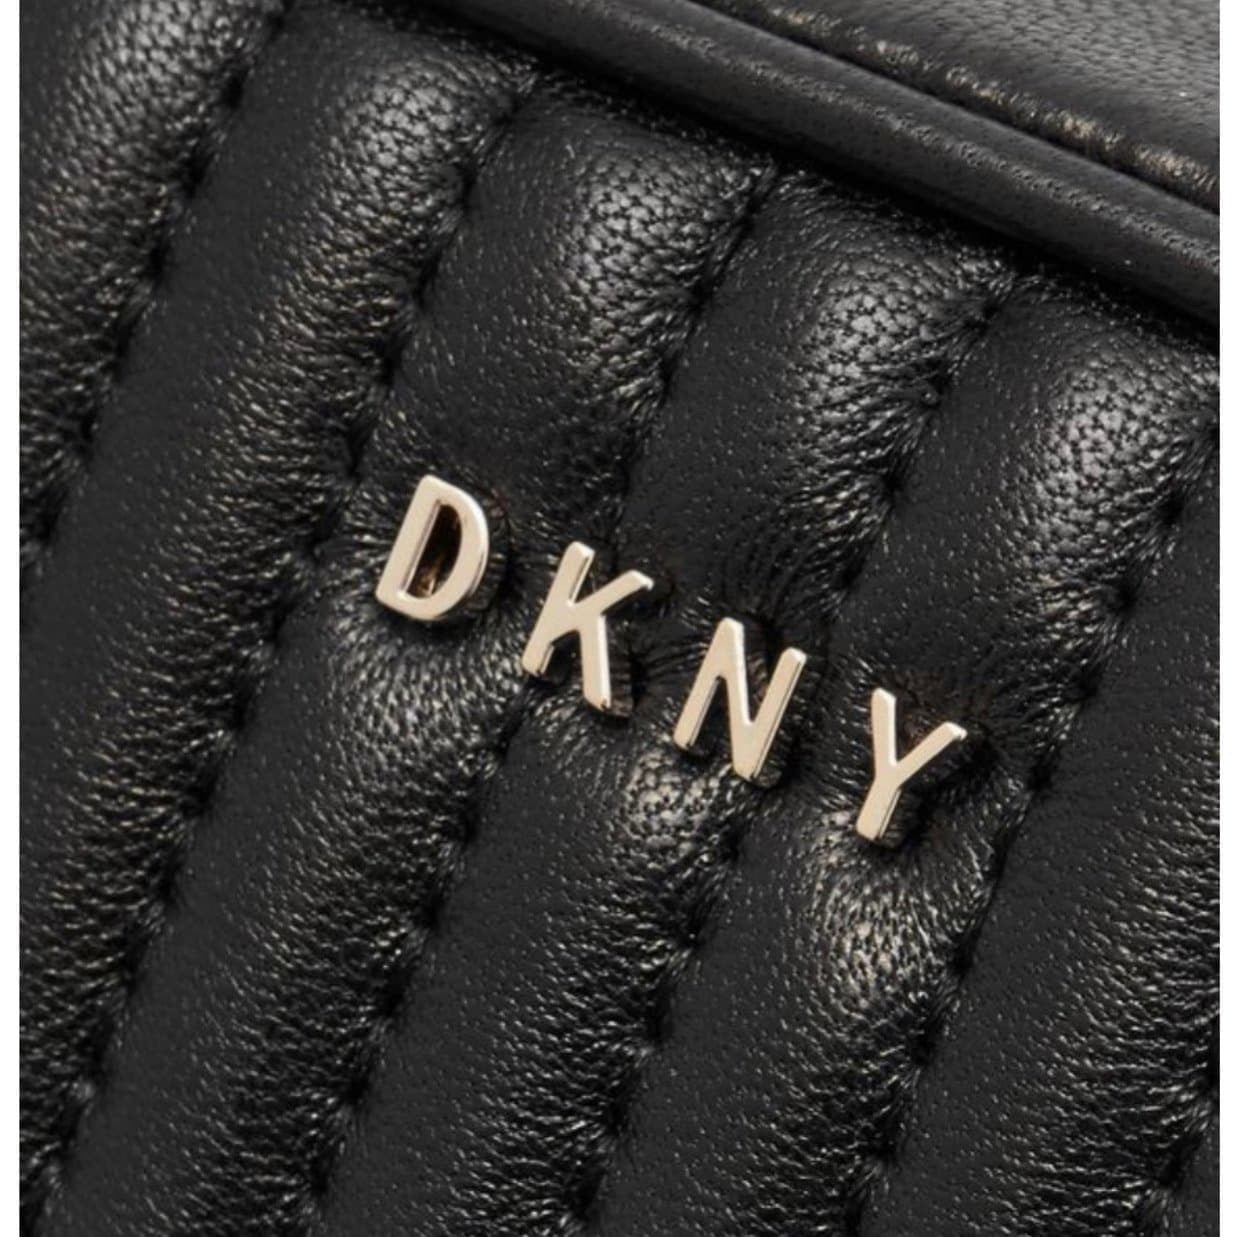 DKNY Small Quilted Leather Clutch – CHIC Kuwait Luxury Outlet